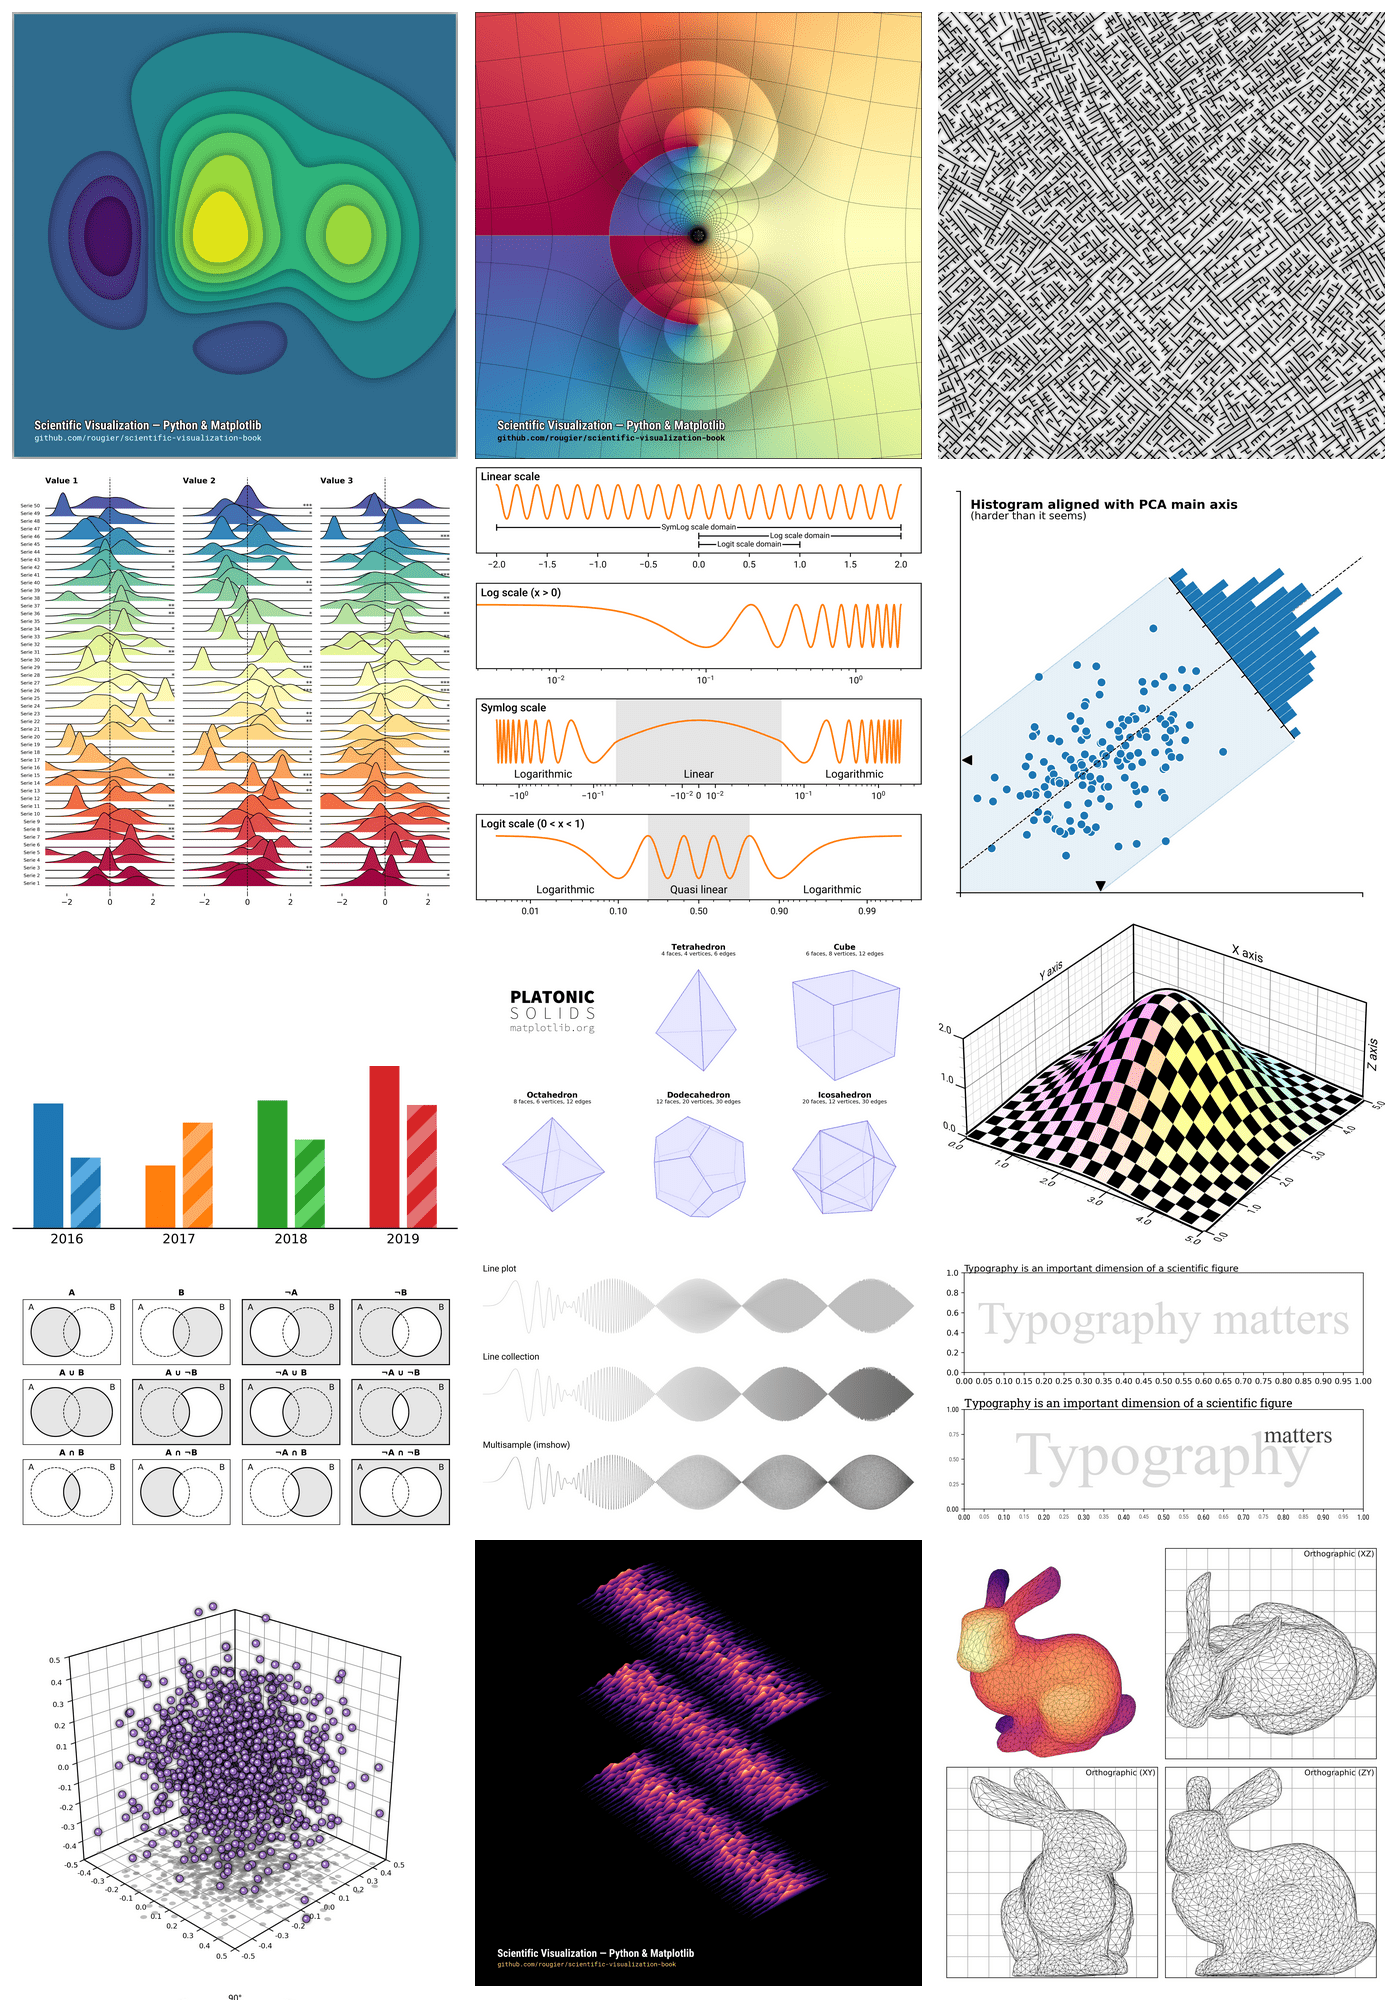 A grid of multiple plots showing how data may be visualized.